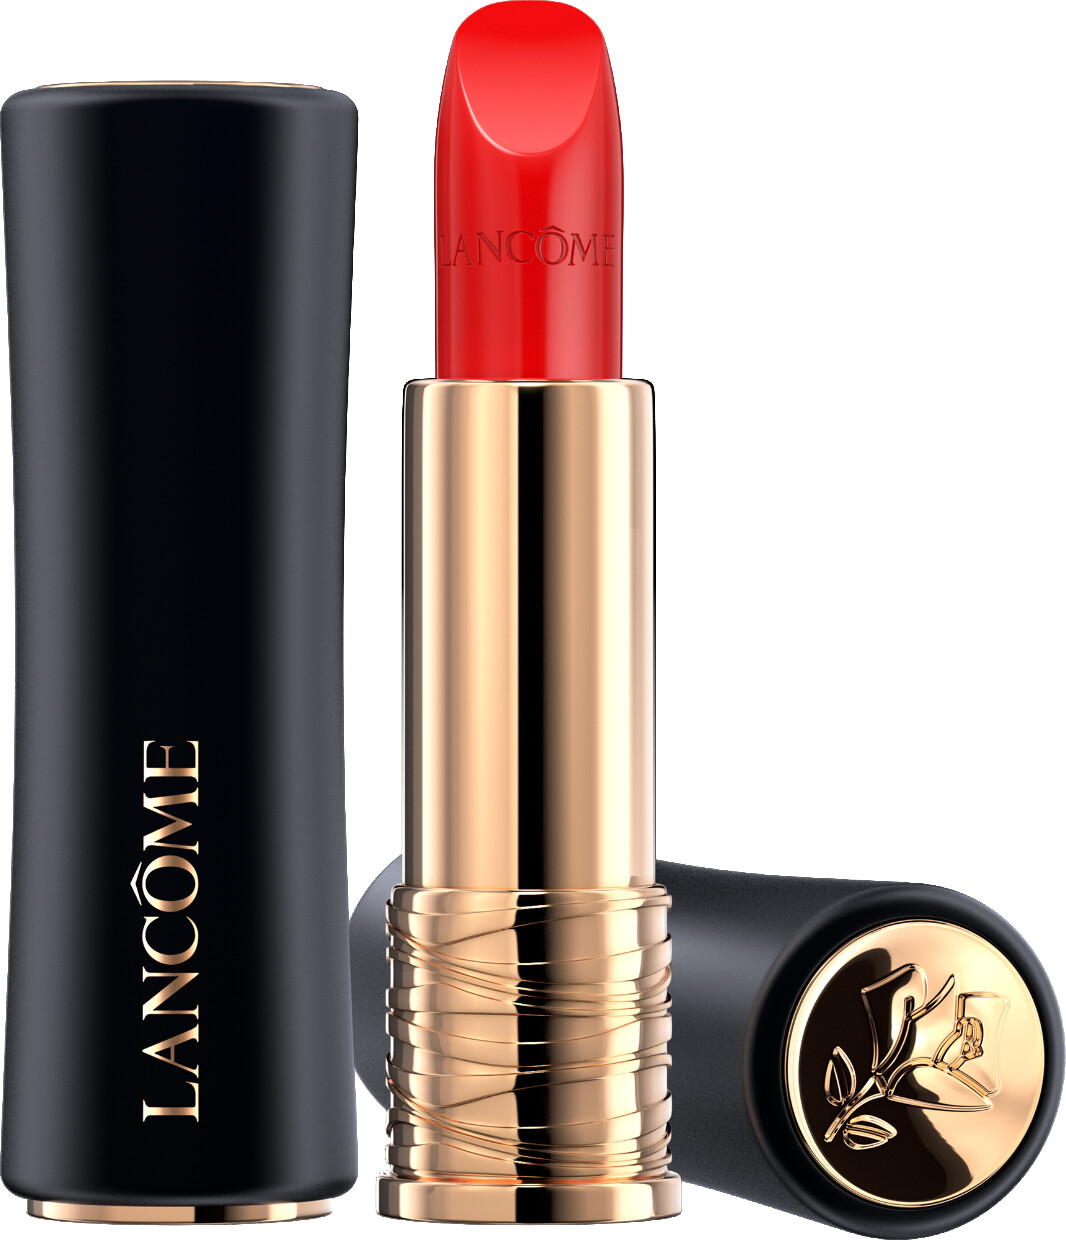 Lancome L'Absolu Rouge Cream Lipstick 3.4g 525 - French Bisou